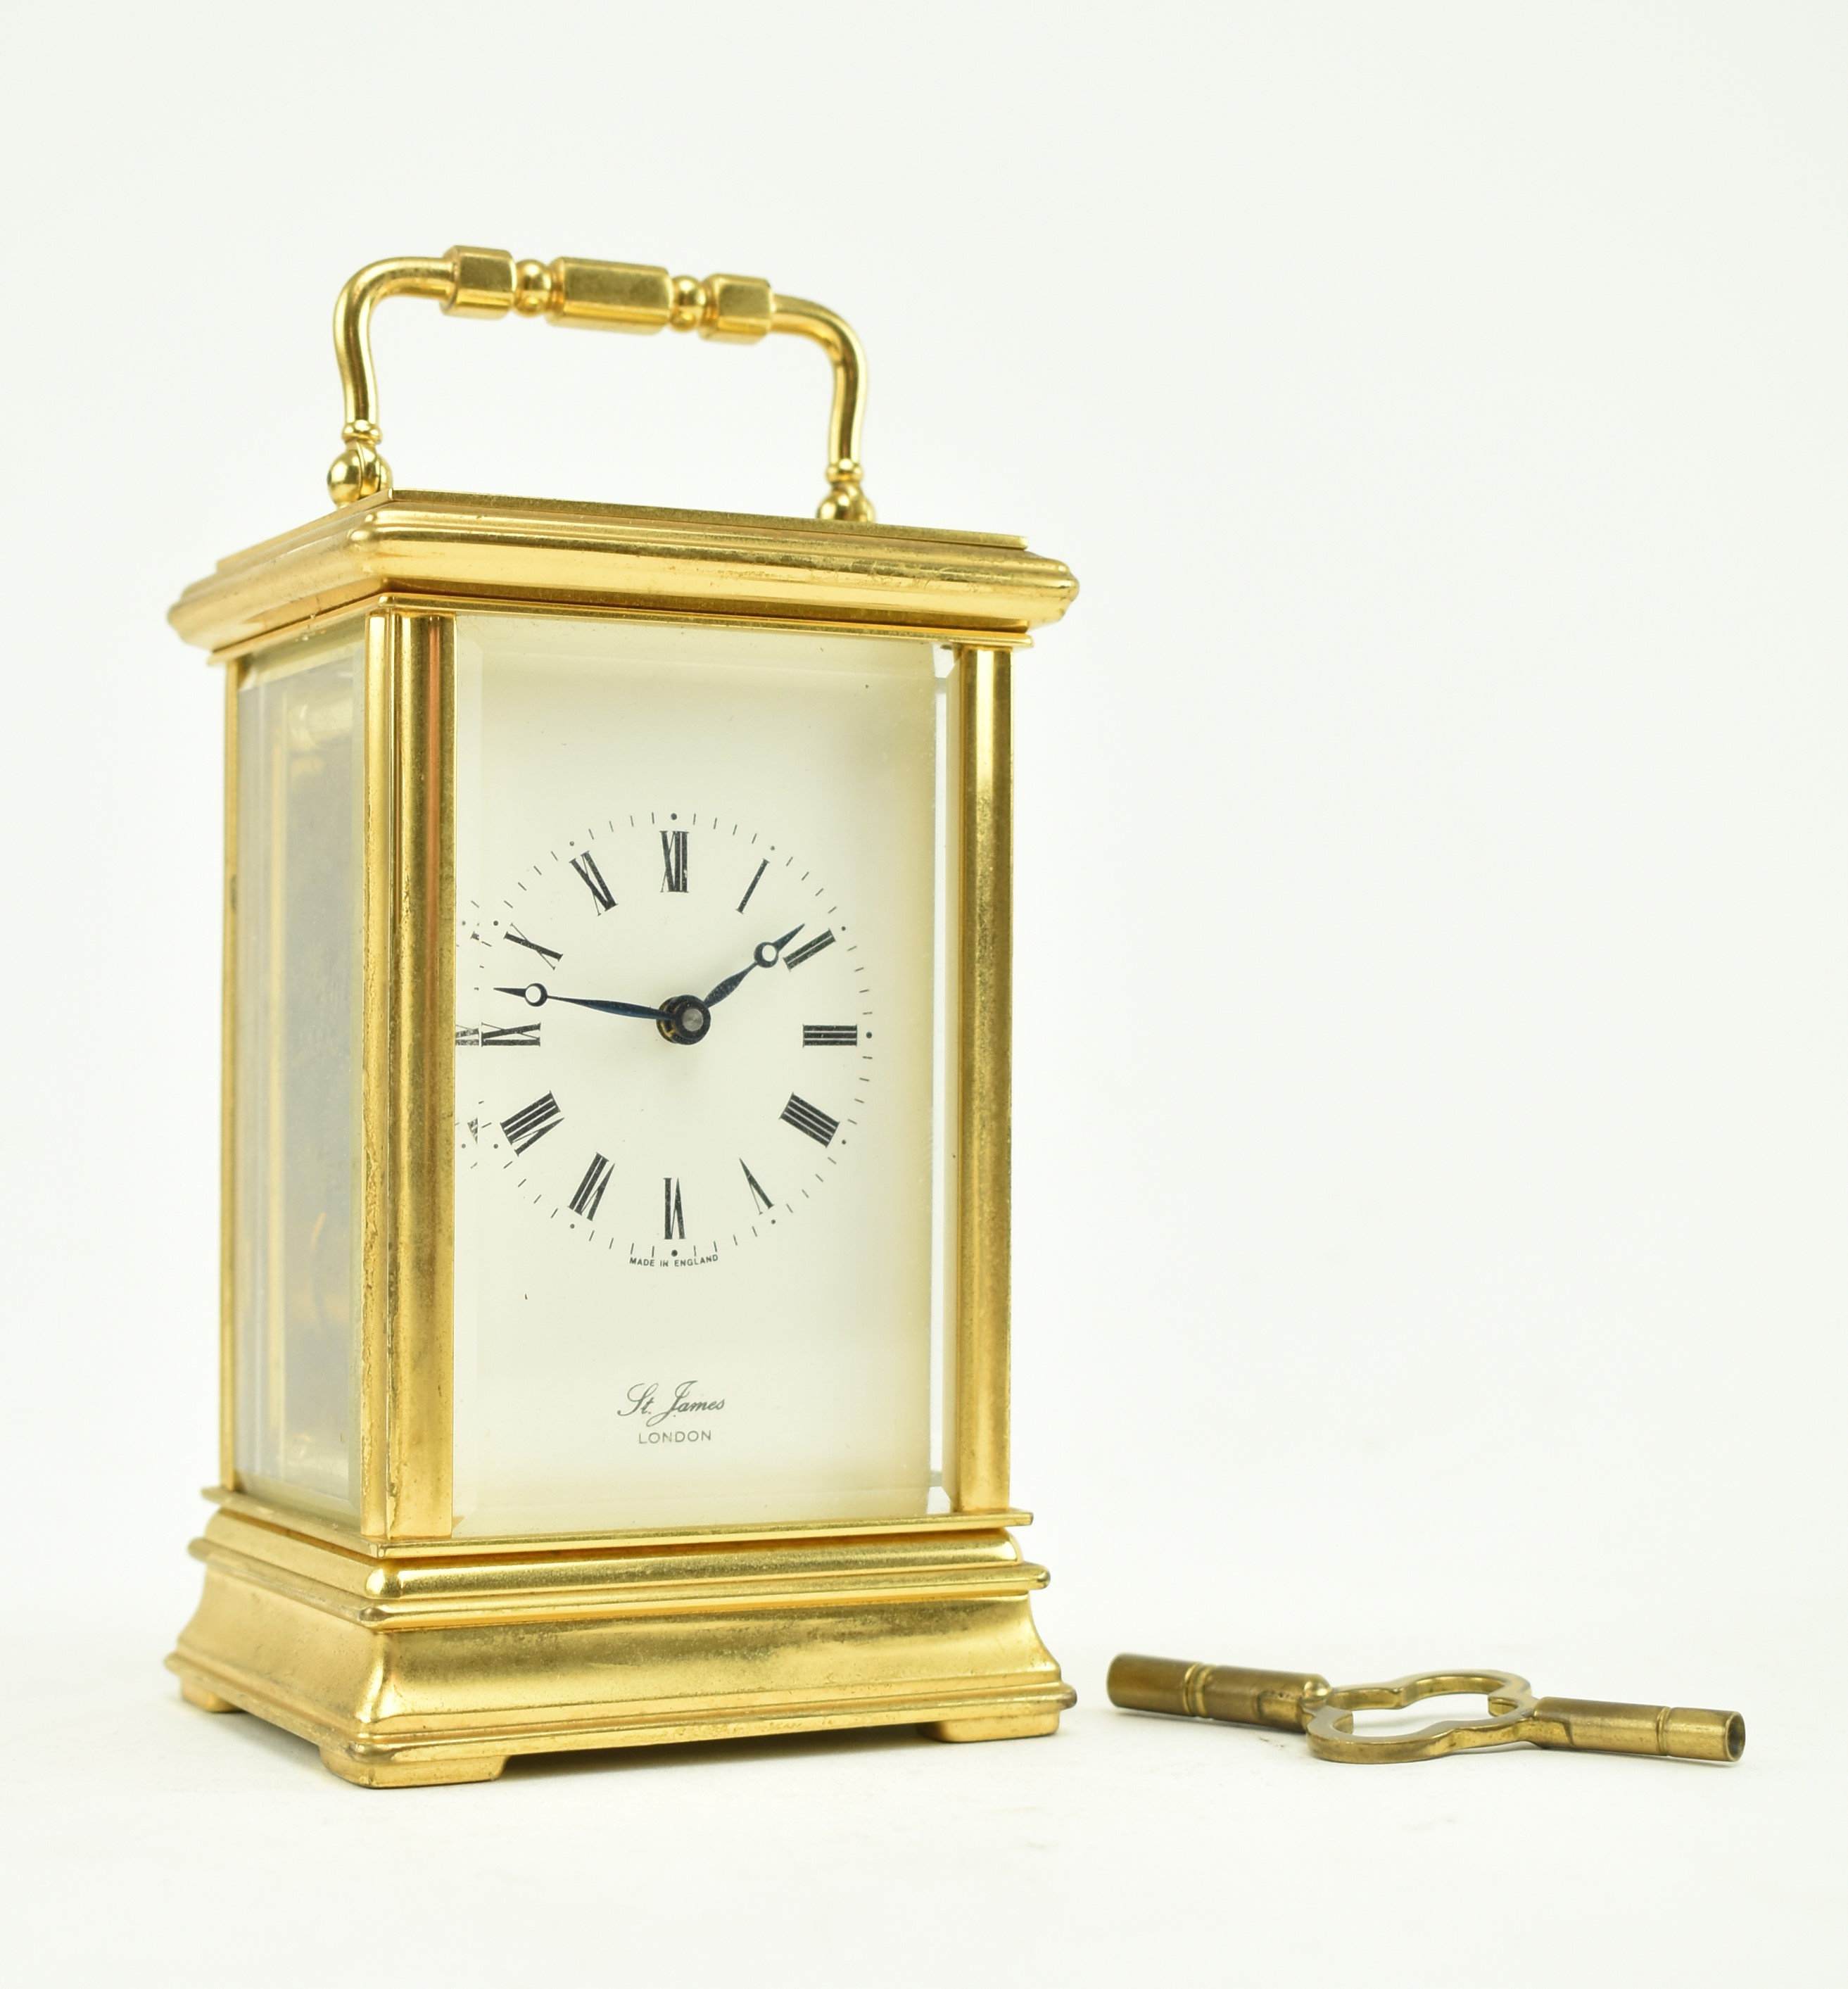 ST. JAMES BRASS REPEATING MANTLEPIECE CARRIAGE CLOCK - Image 2 of 6